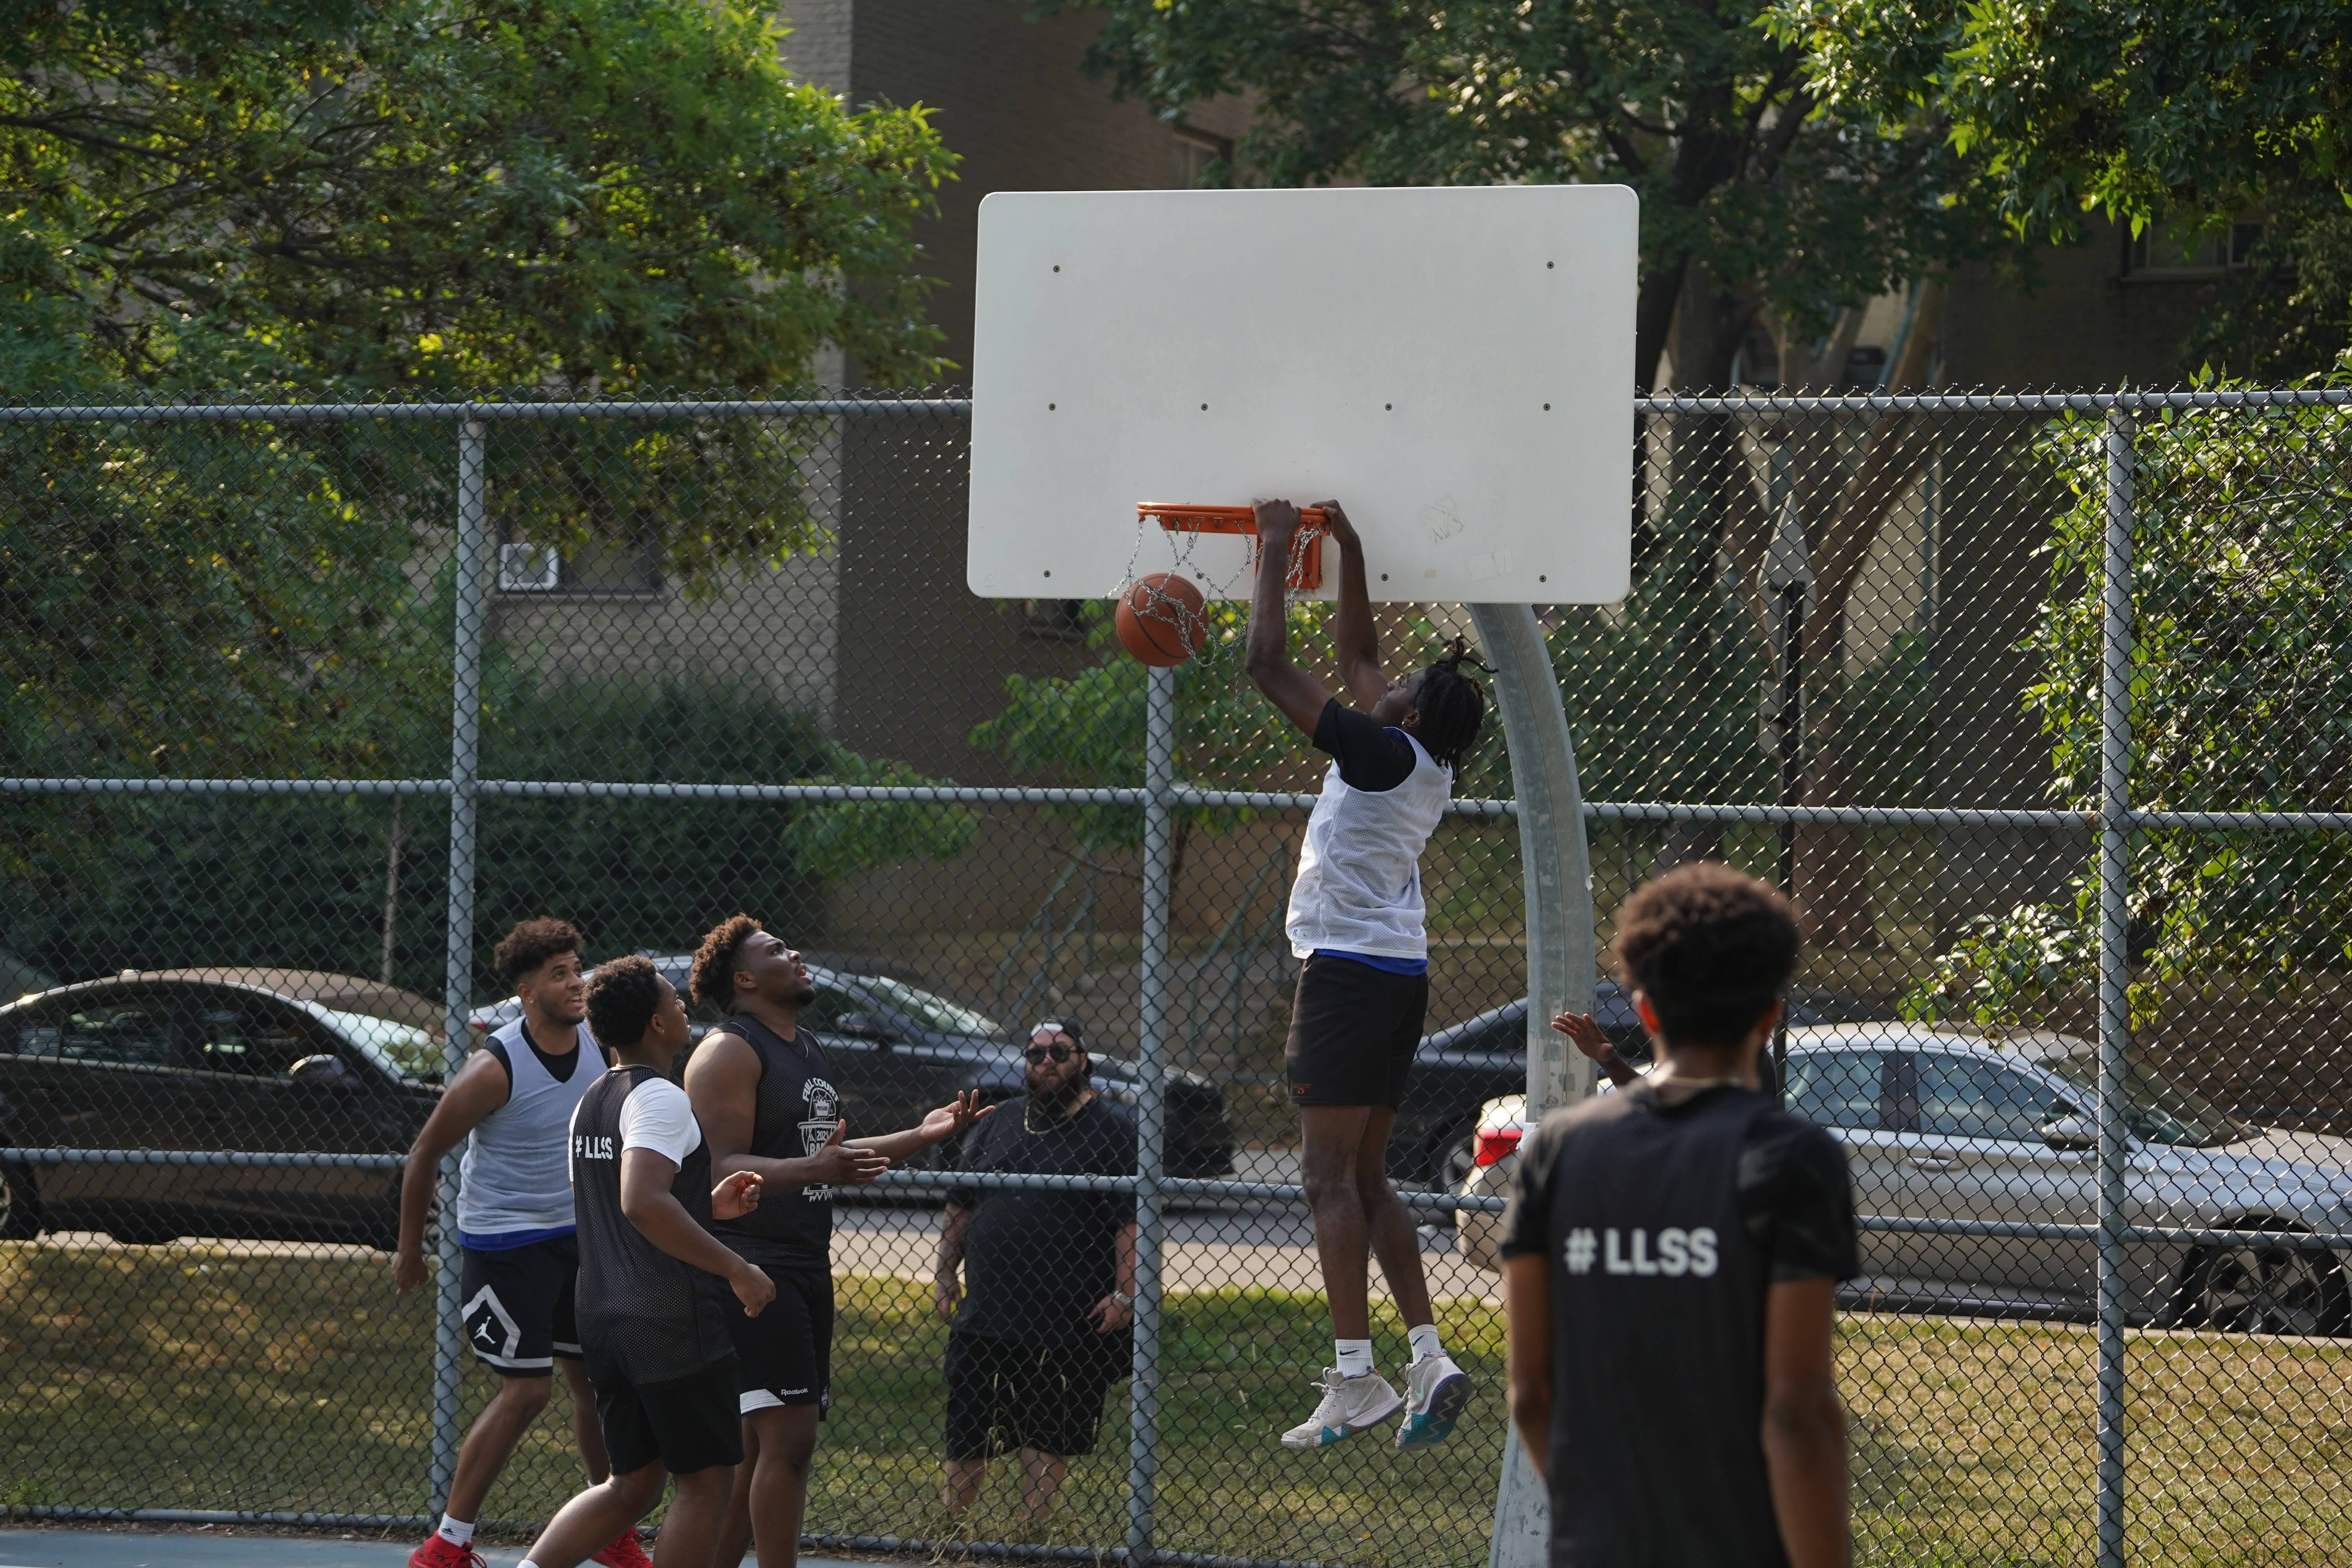 A player hanging off the basketball hoop